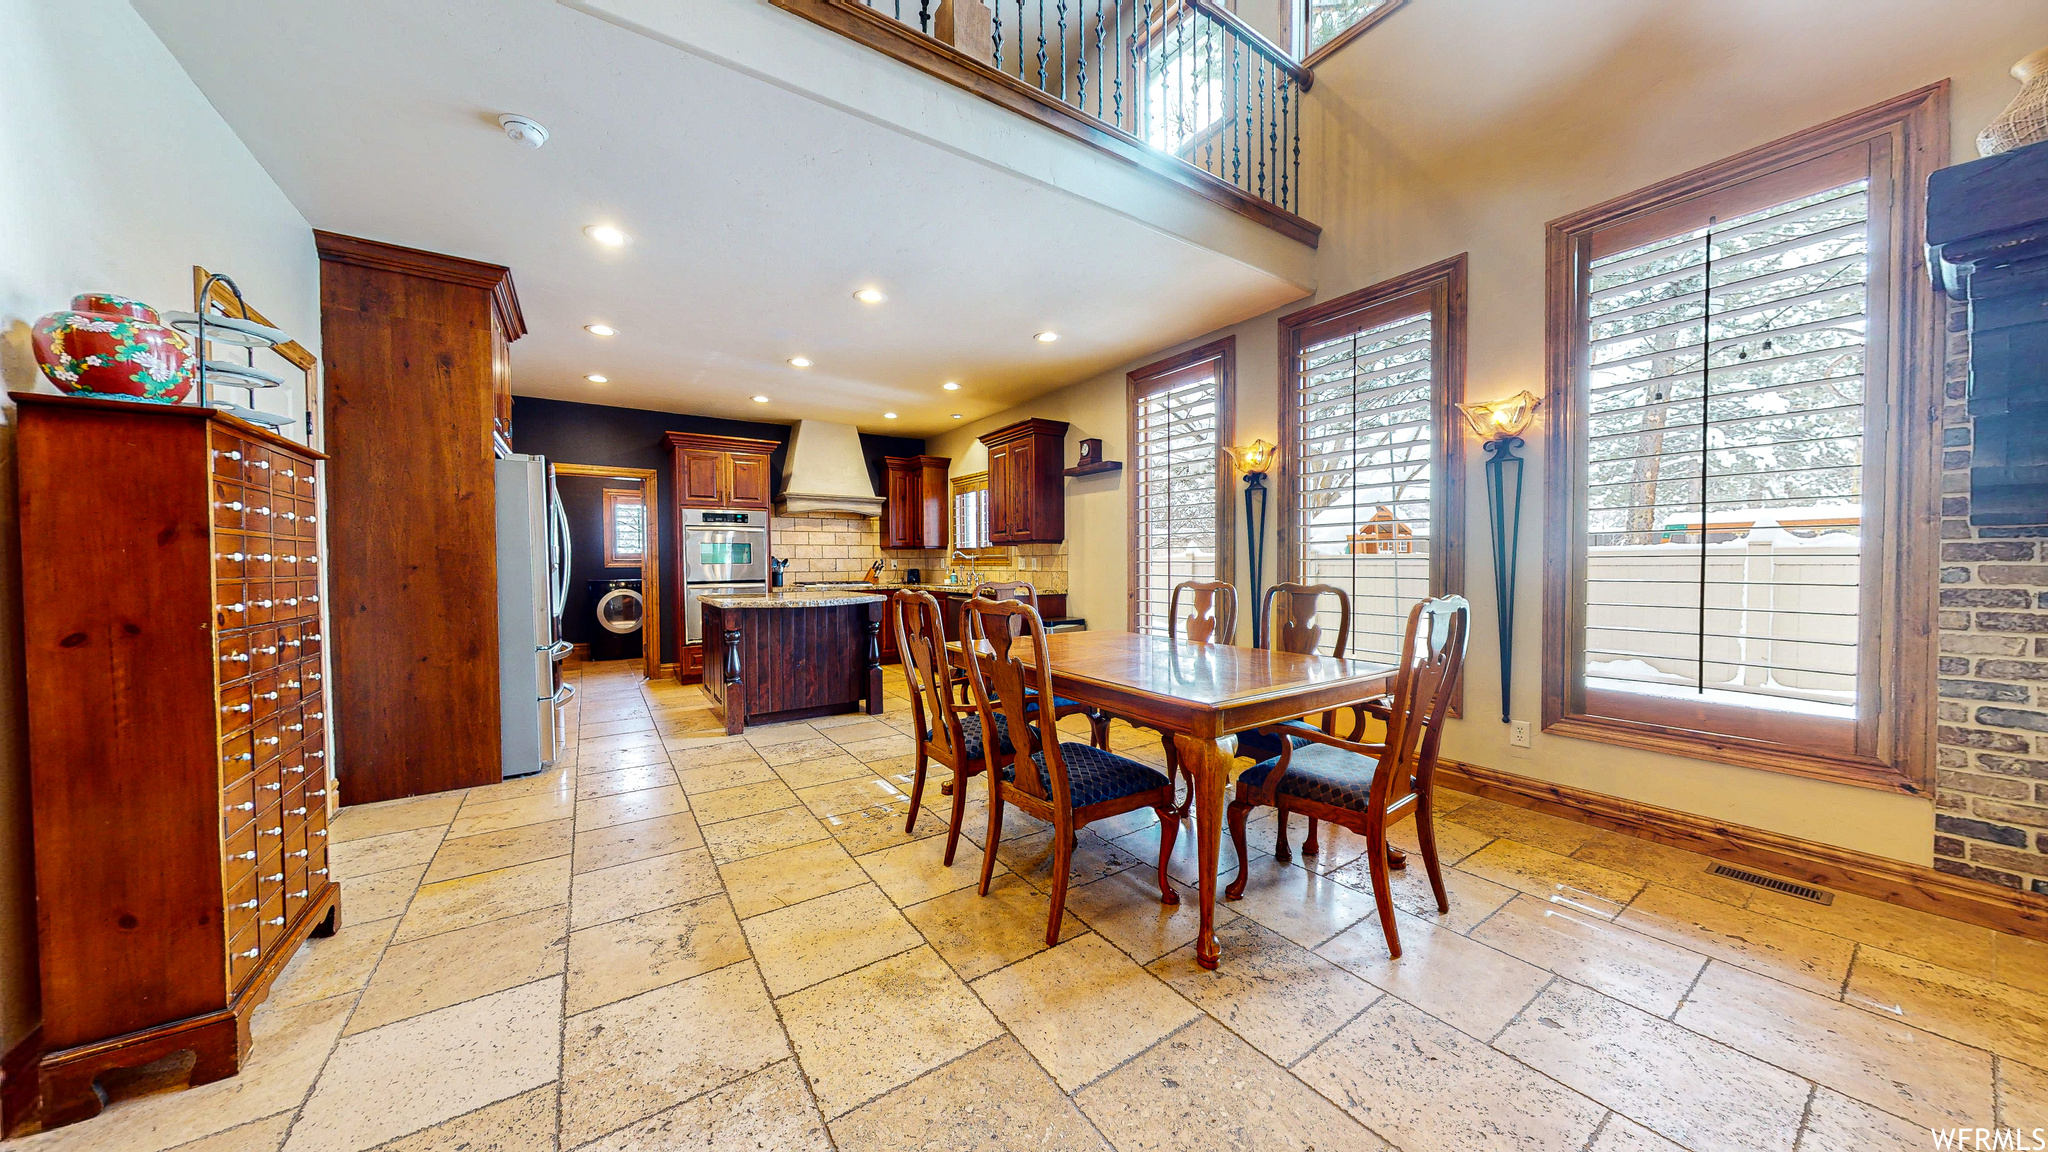 Great open floor plan for dining, kitchen, and family areas.